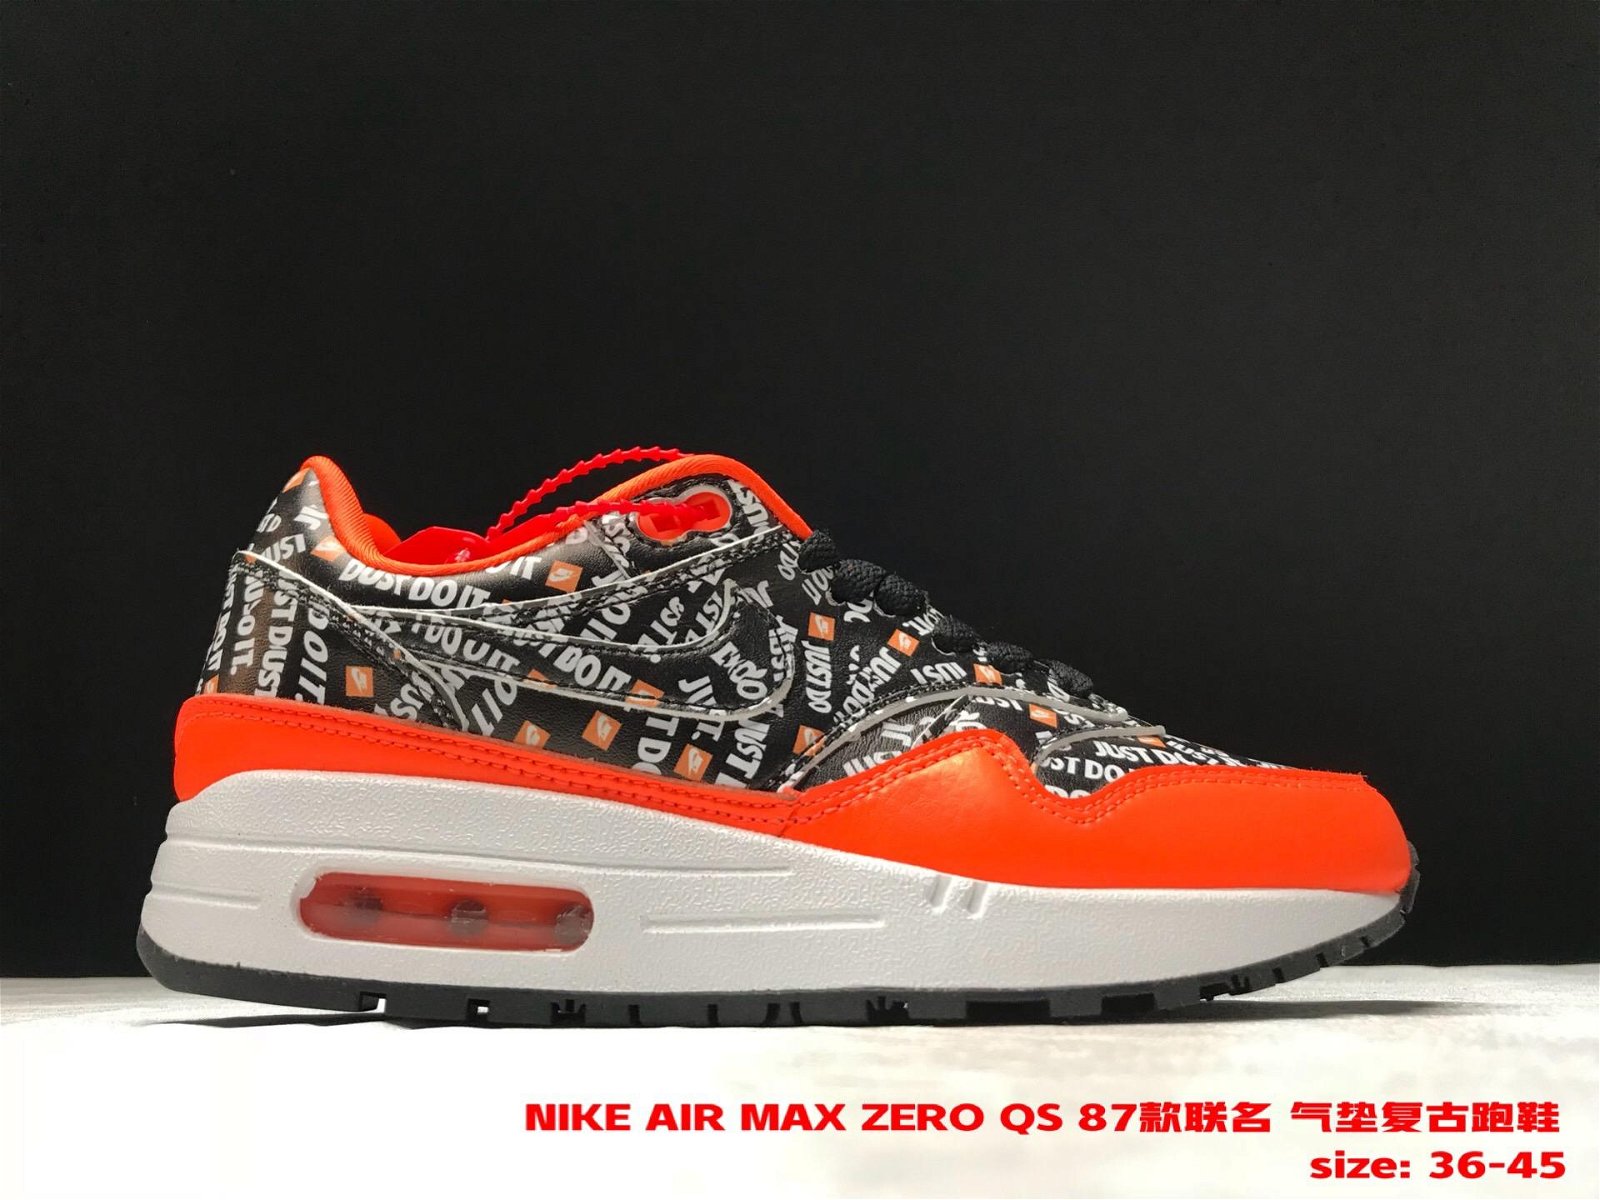 New AIR MAX ZERO QS 87 AIR max co-branded stylish retro running shoes - Air  Max (China Trading Company) - Athletic & Sports Shoes - Shoes